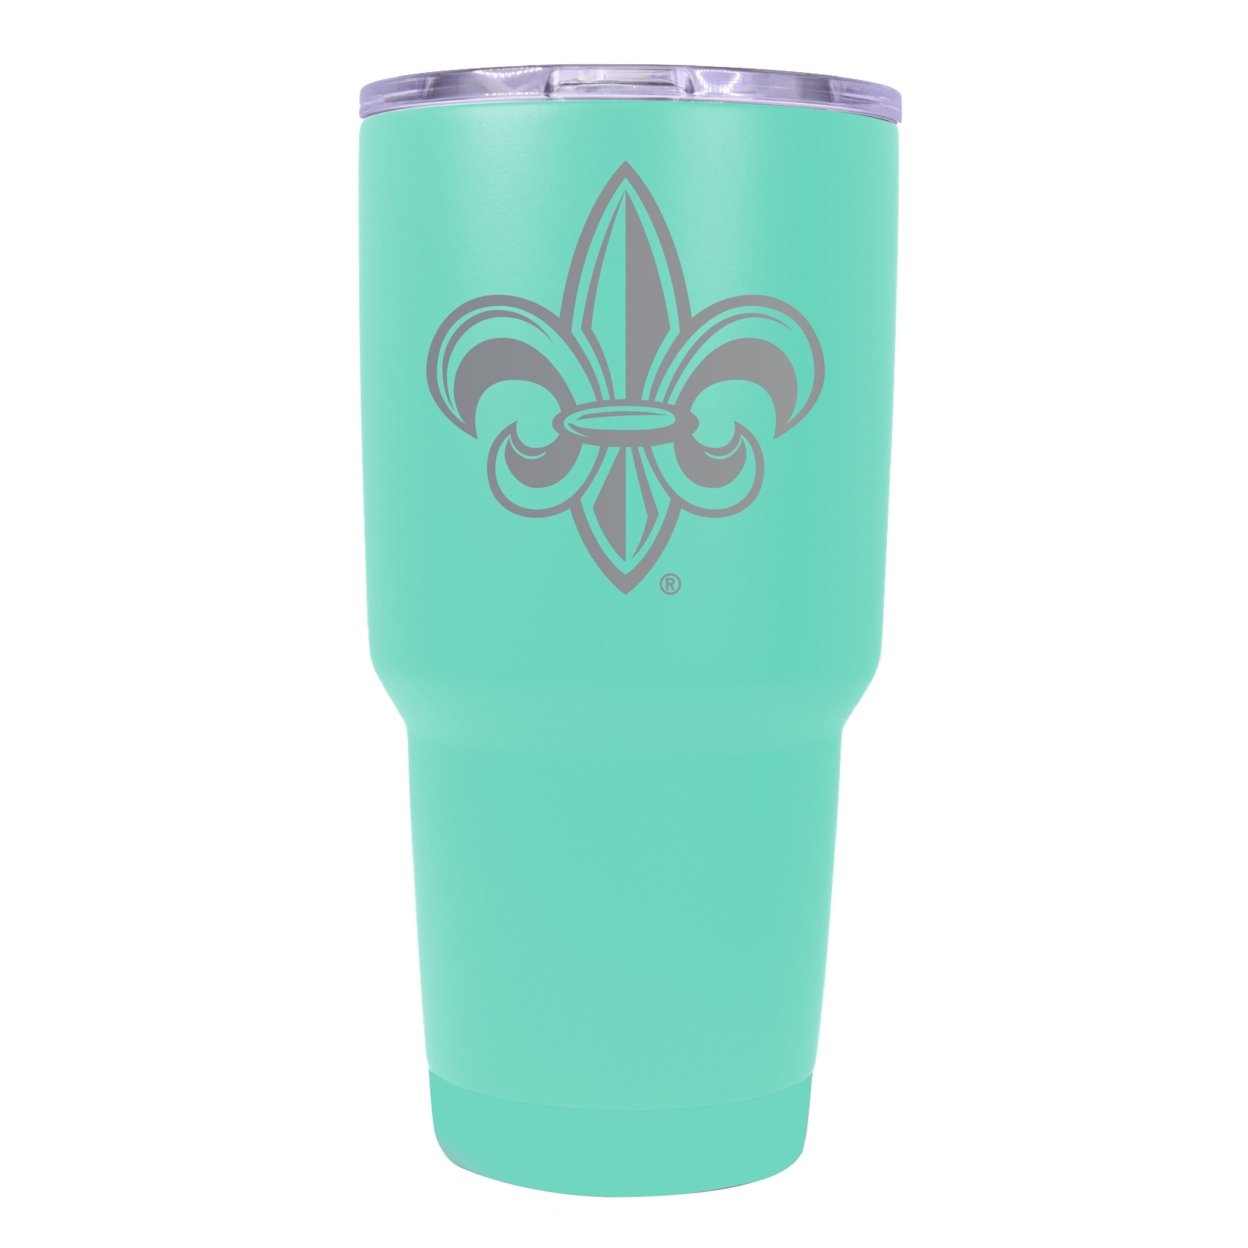 Louisiana At Lafayette 24 Oz Laser Engraved Stainless Steel Insulated Tumbler - Choose Your Color. - Seafoam